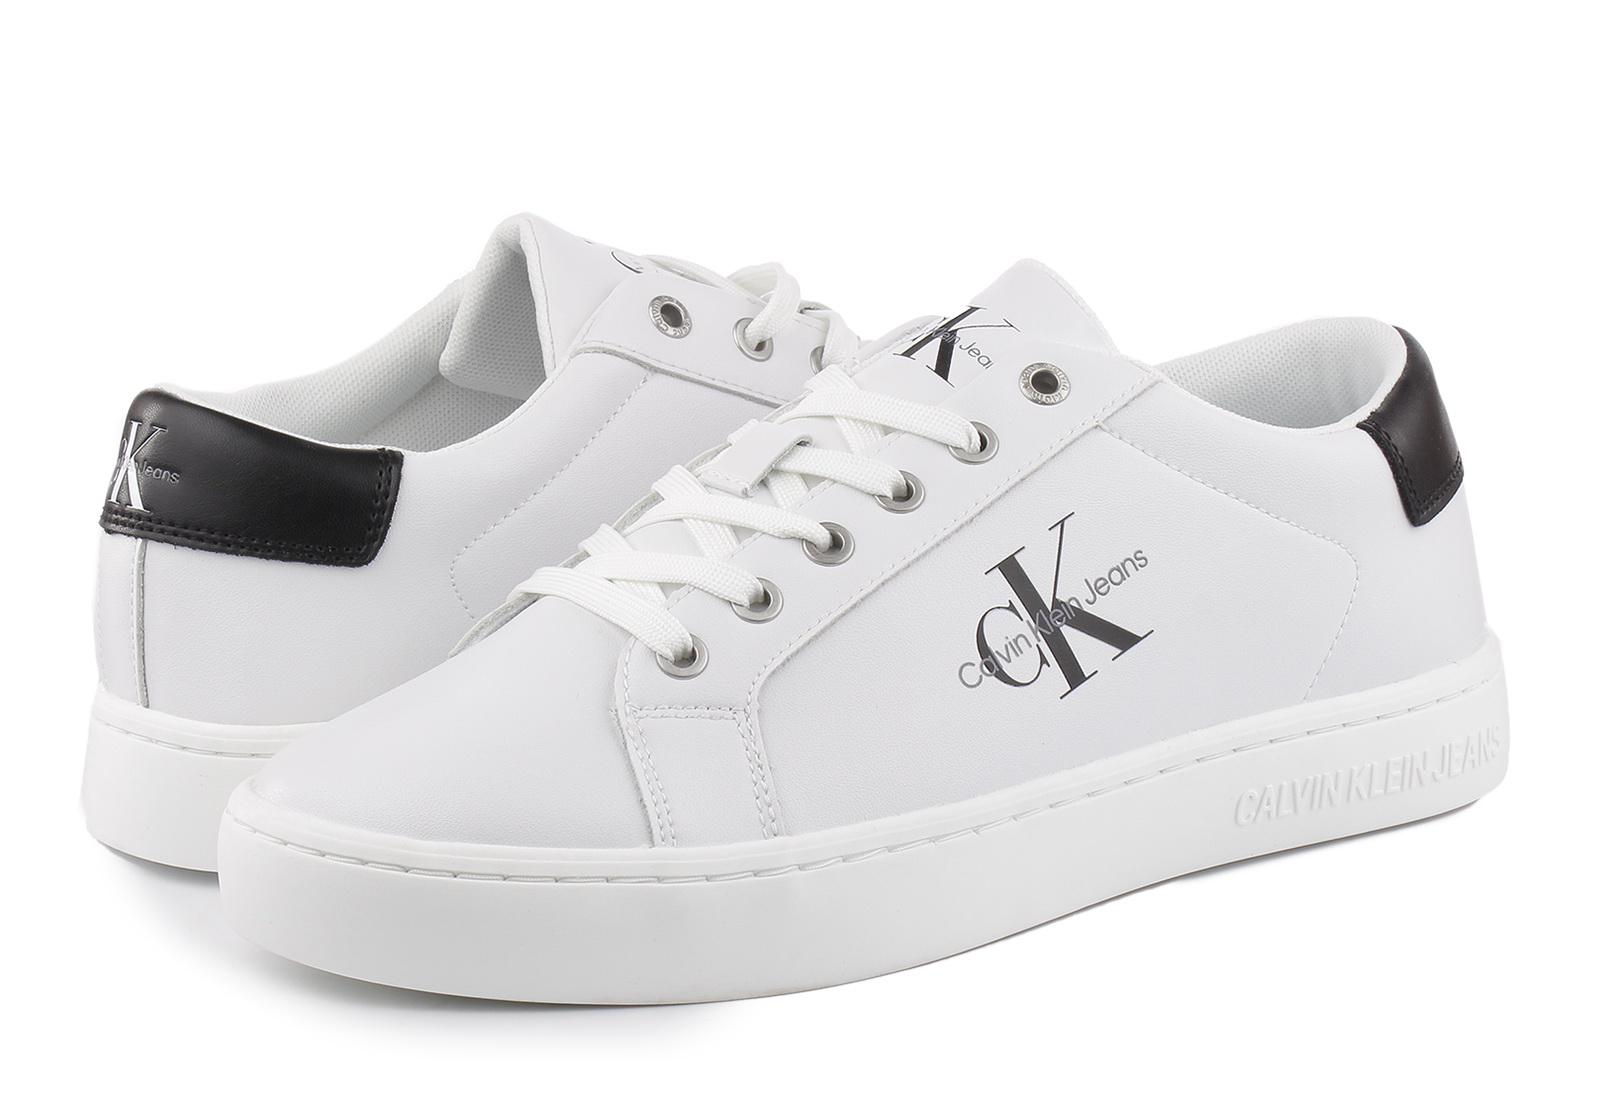 Calvin Klein Jeans Trainers - Sawyer 14l - YM00491-YAF - Online shop for  sneakers, shoes and boots